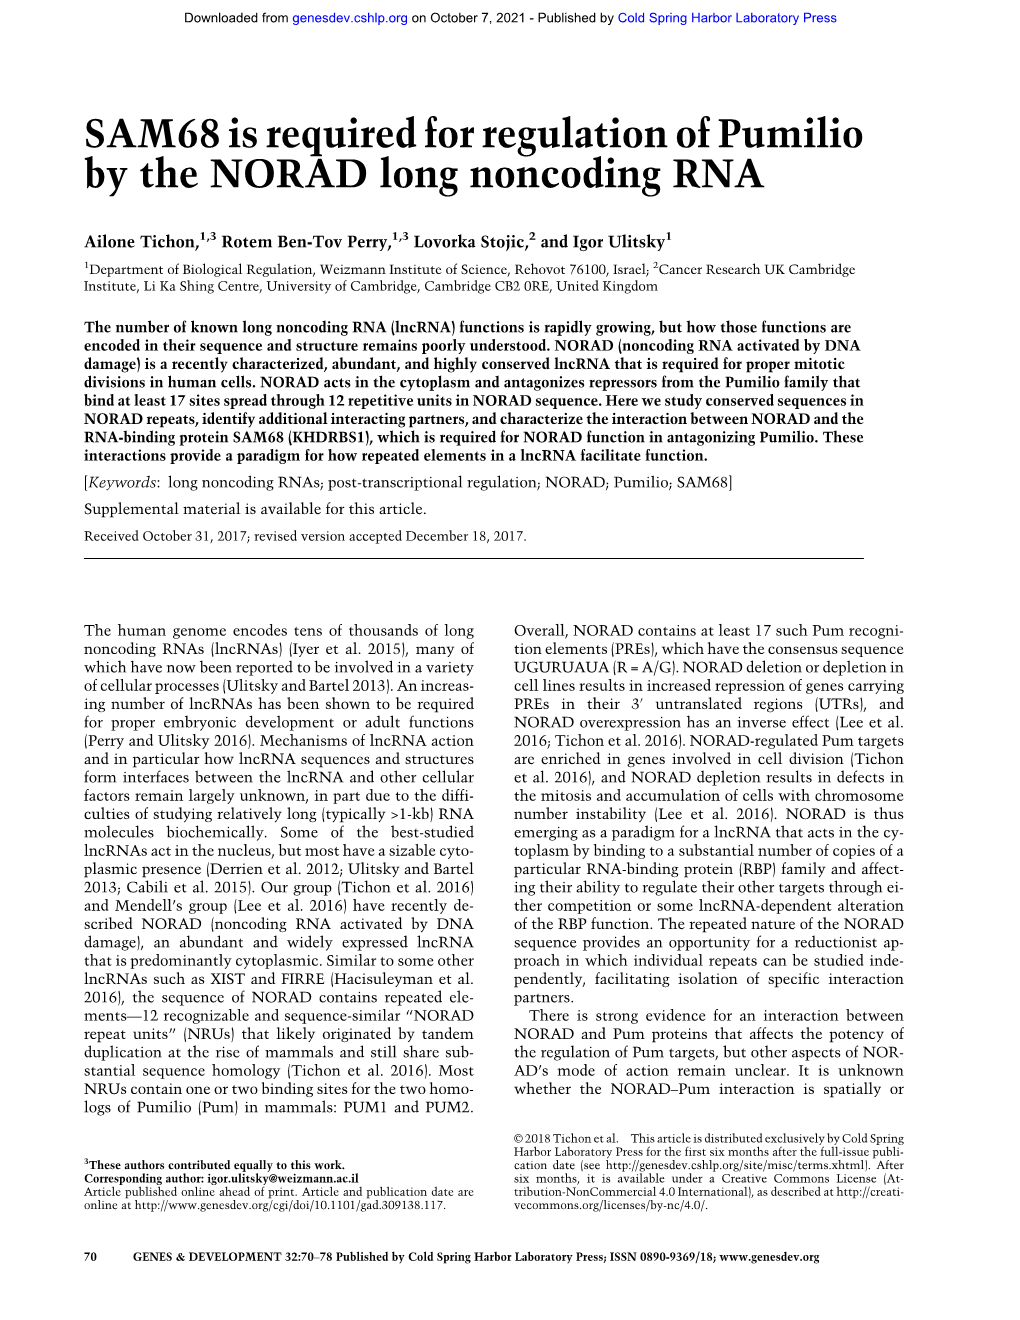 SAM68 Is Required for Regulation of Pumilio by the NORAD Long Noncoding RNA